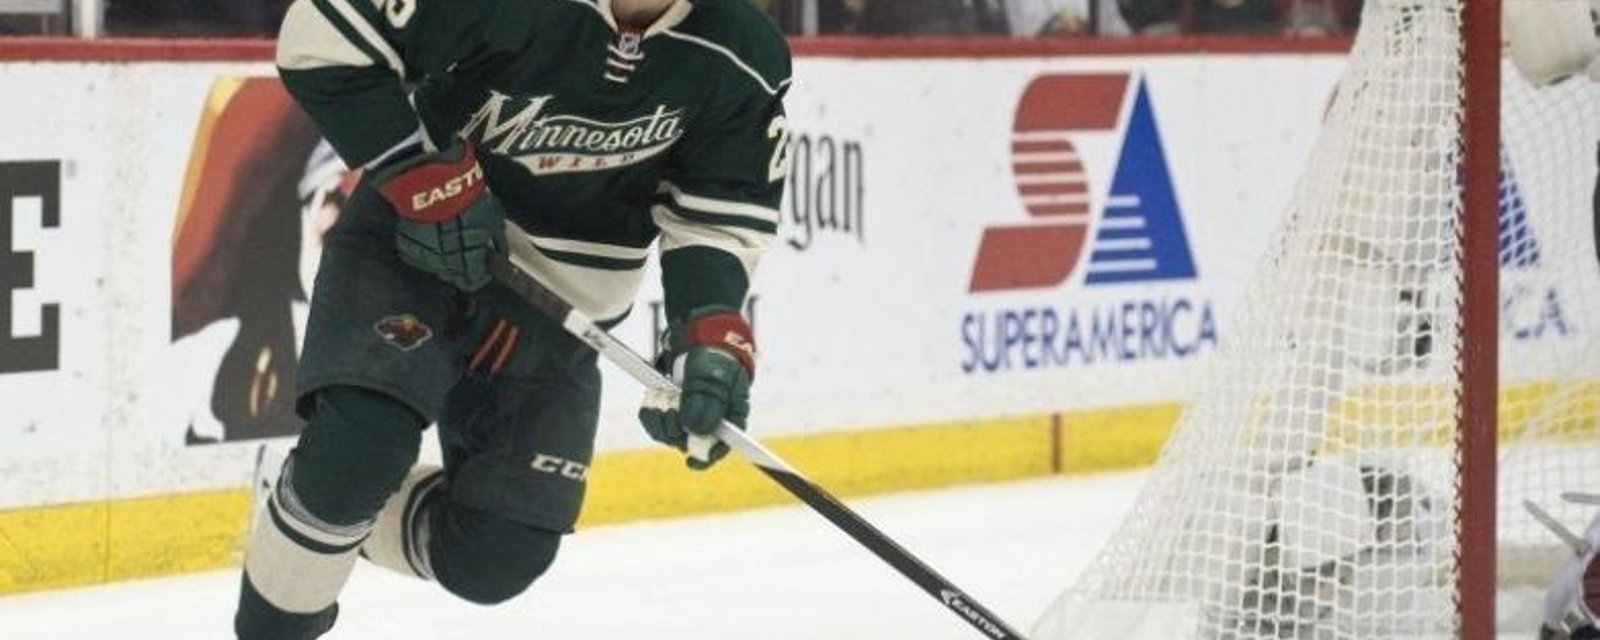 Wild Players That Could Be Shopped by the Trade Deadline